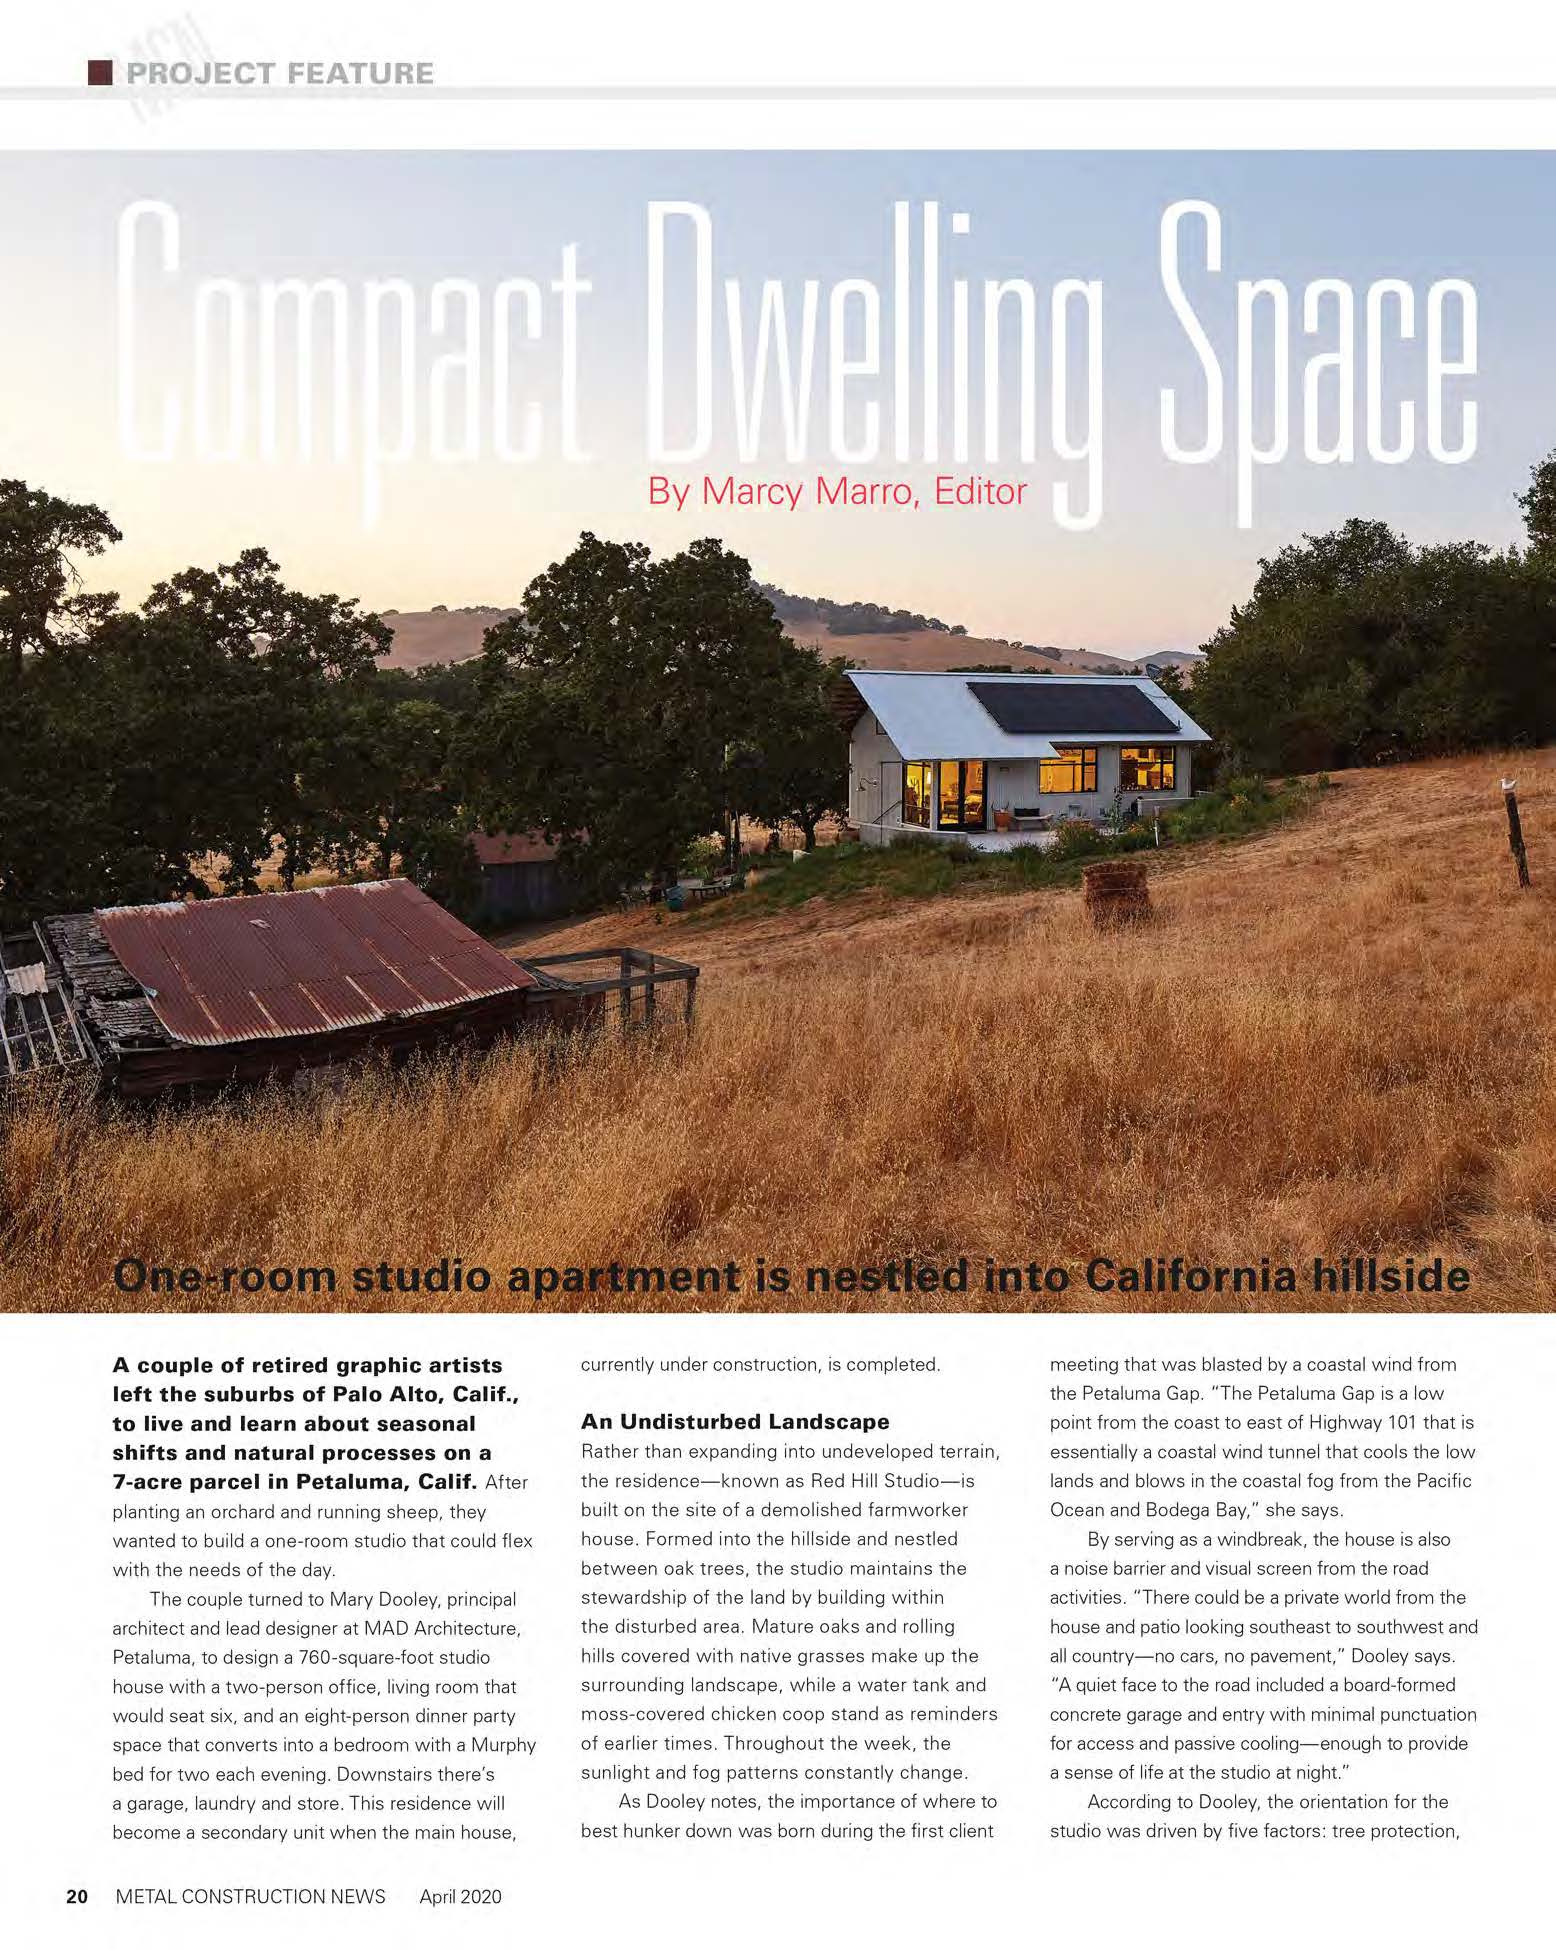 Red Hill Studio Metal Construction News April 2020 Marin County ADU_Page_1